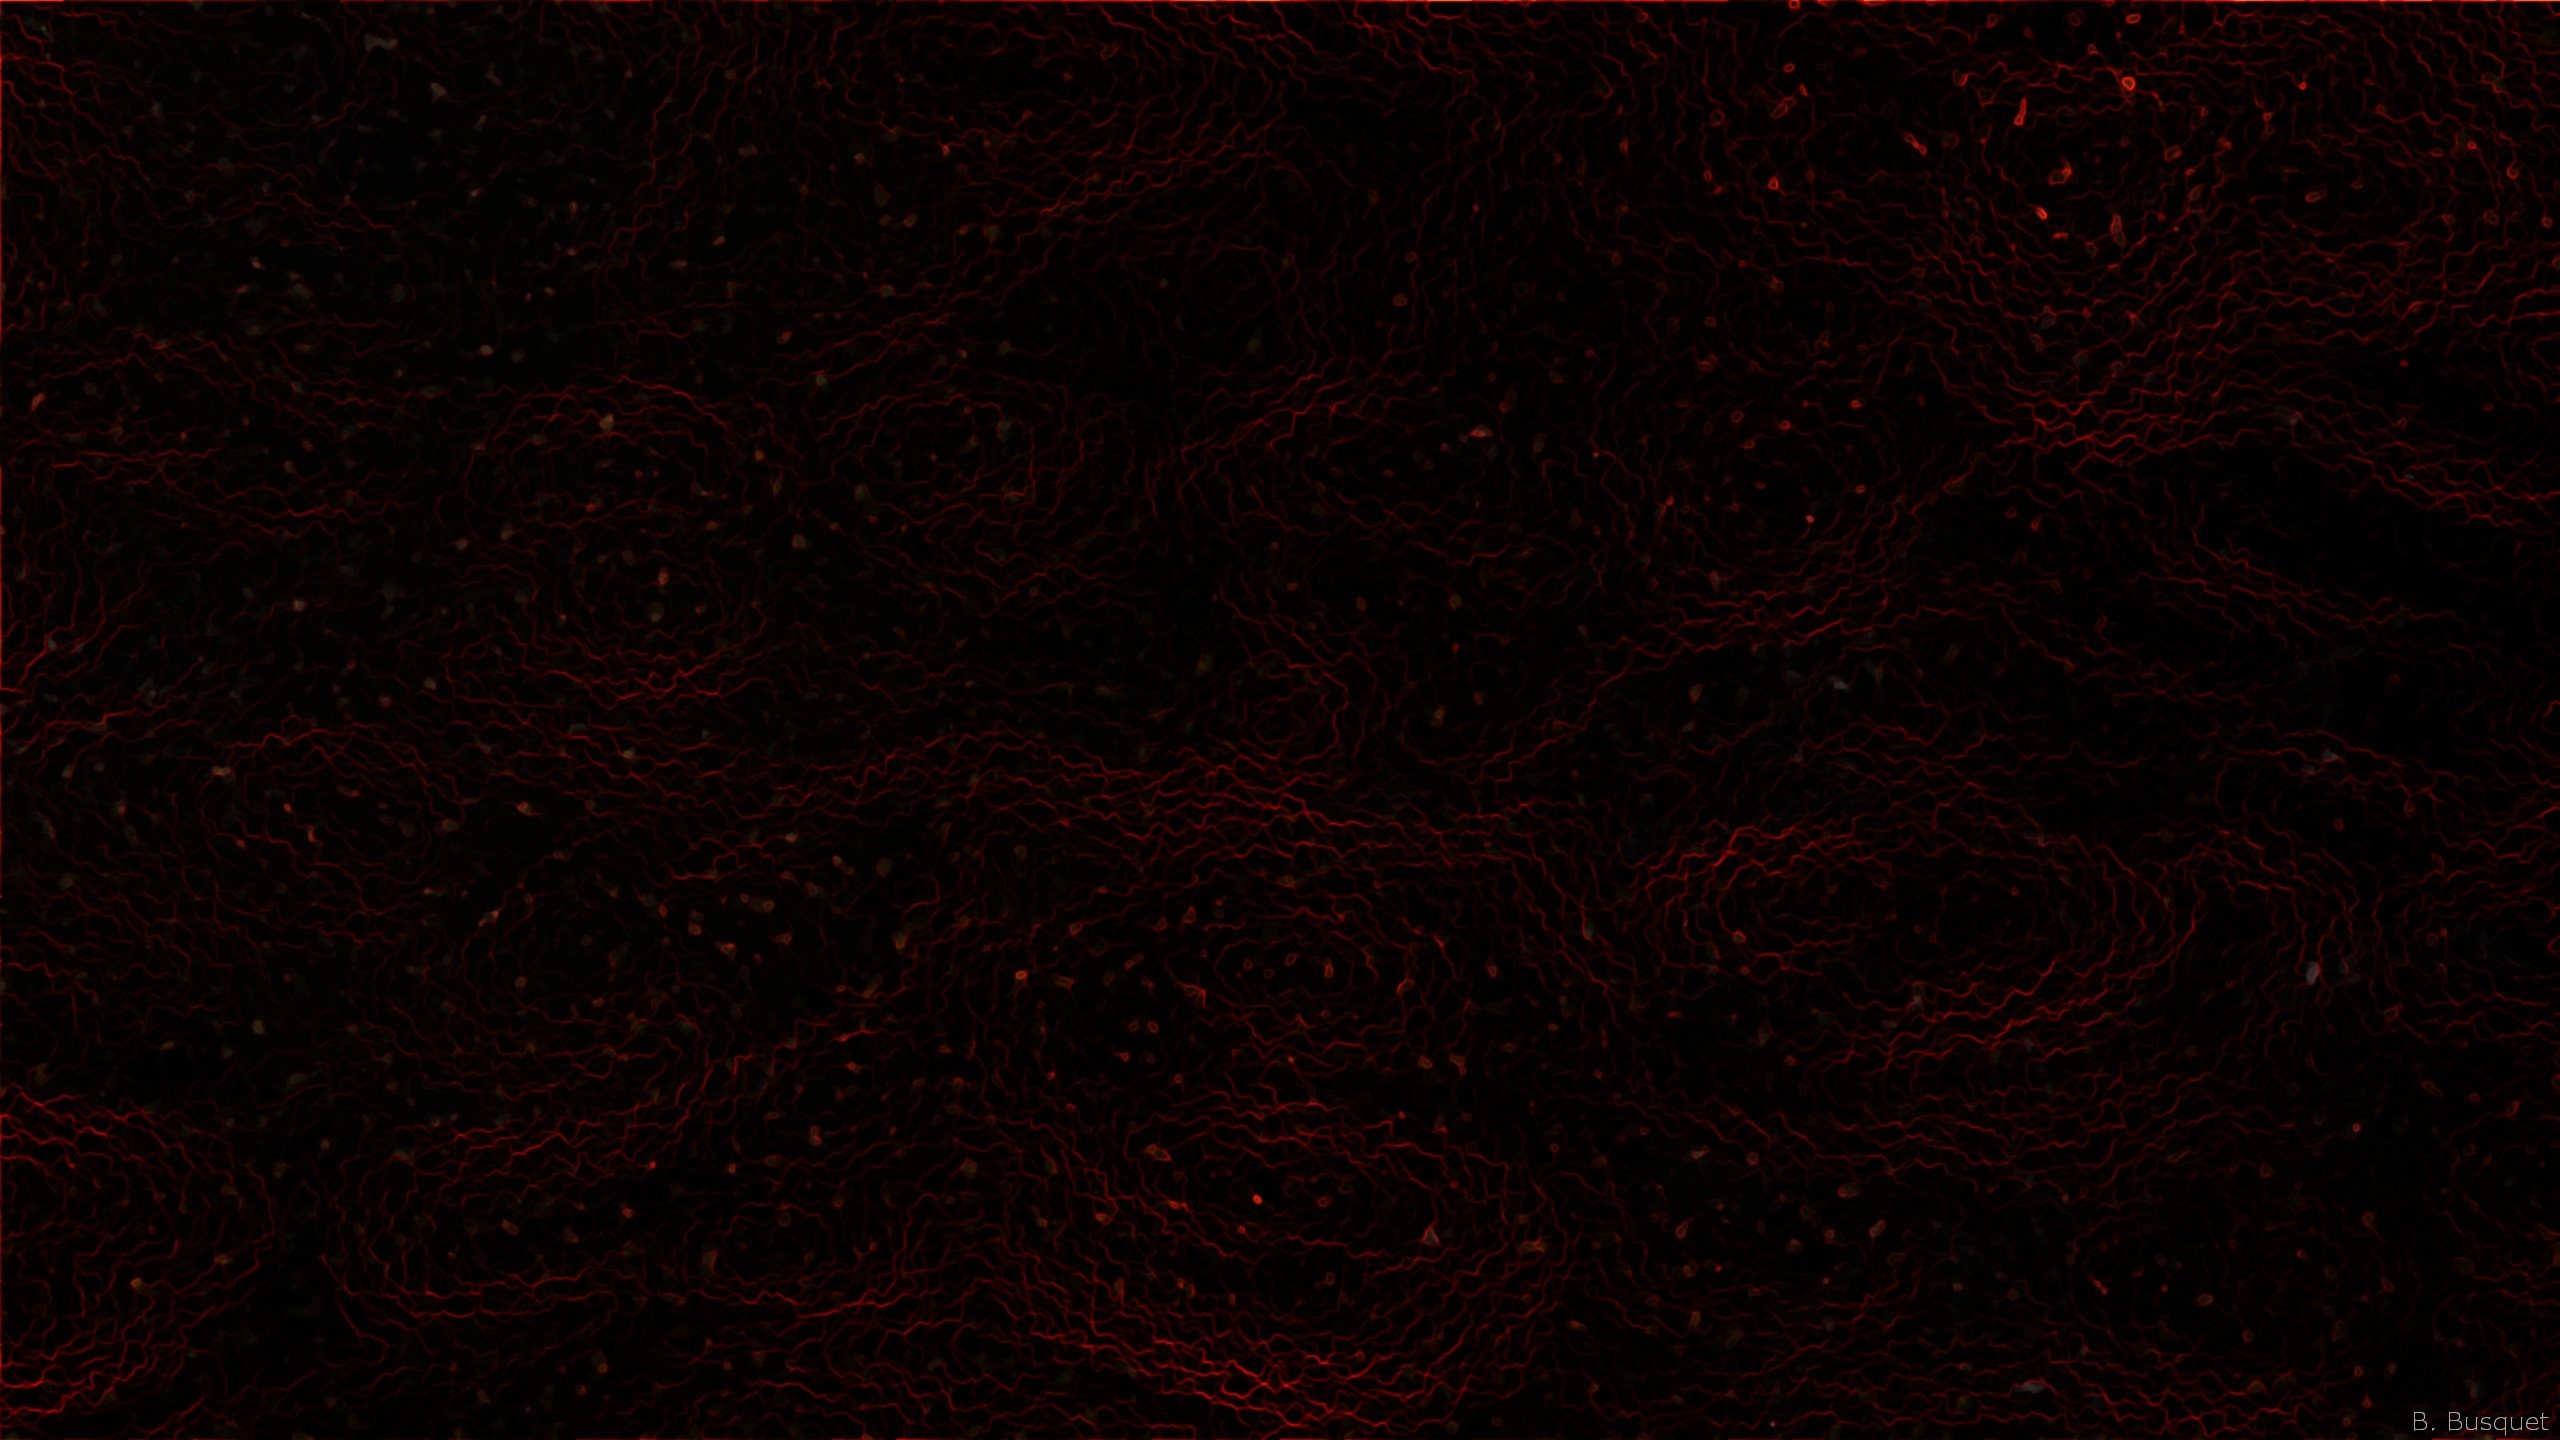 Abstract wallpaper with a dark pattern